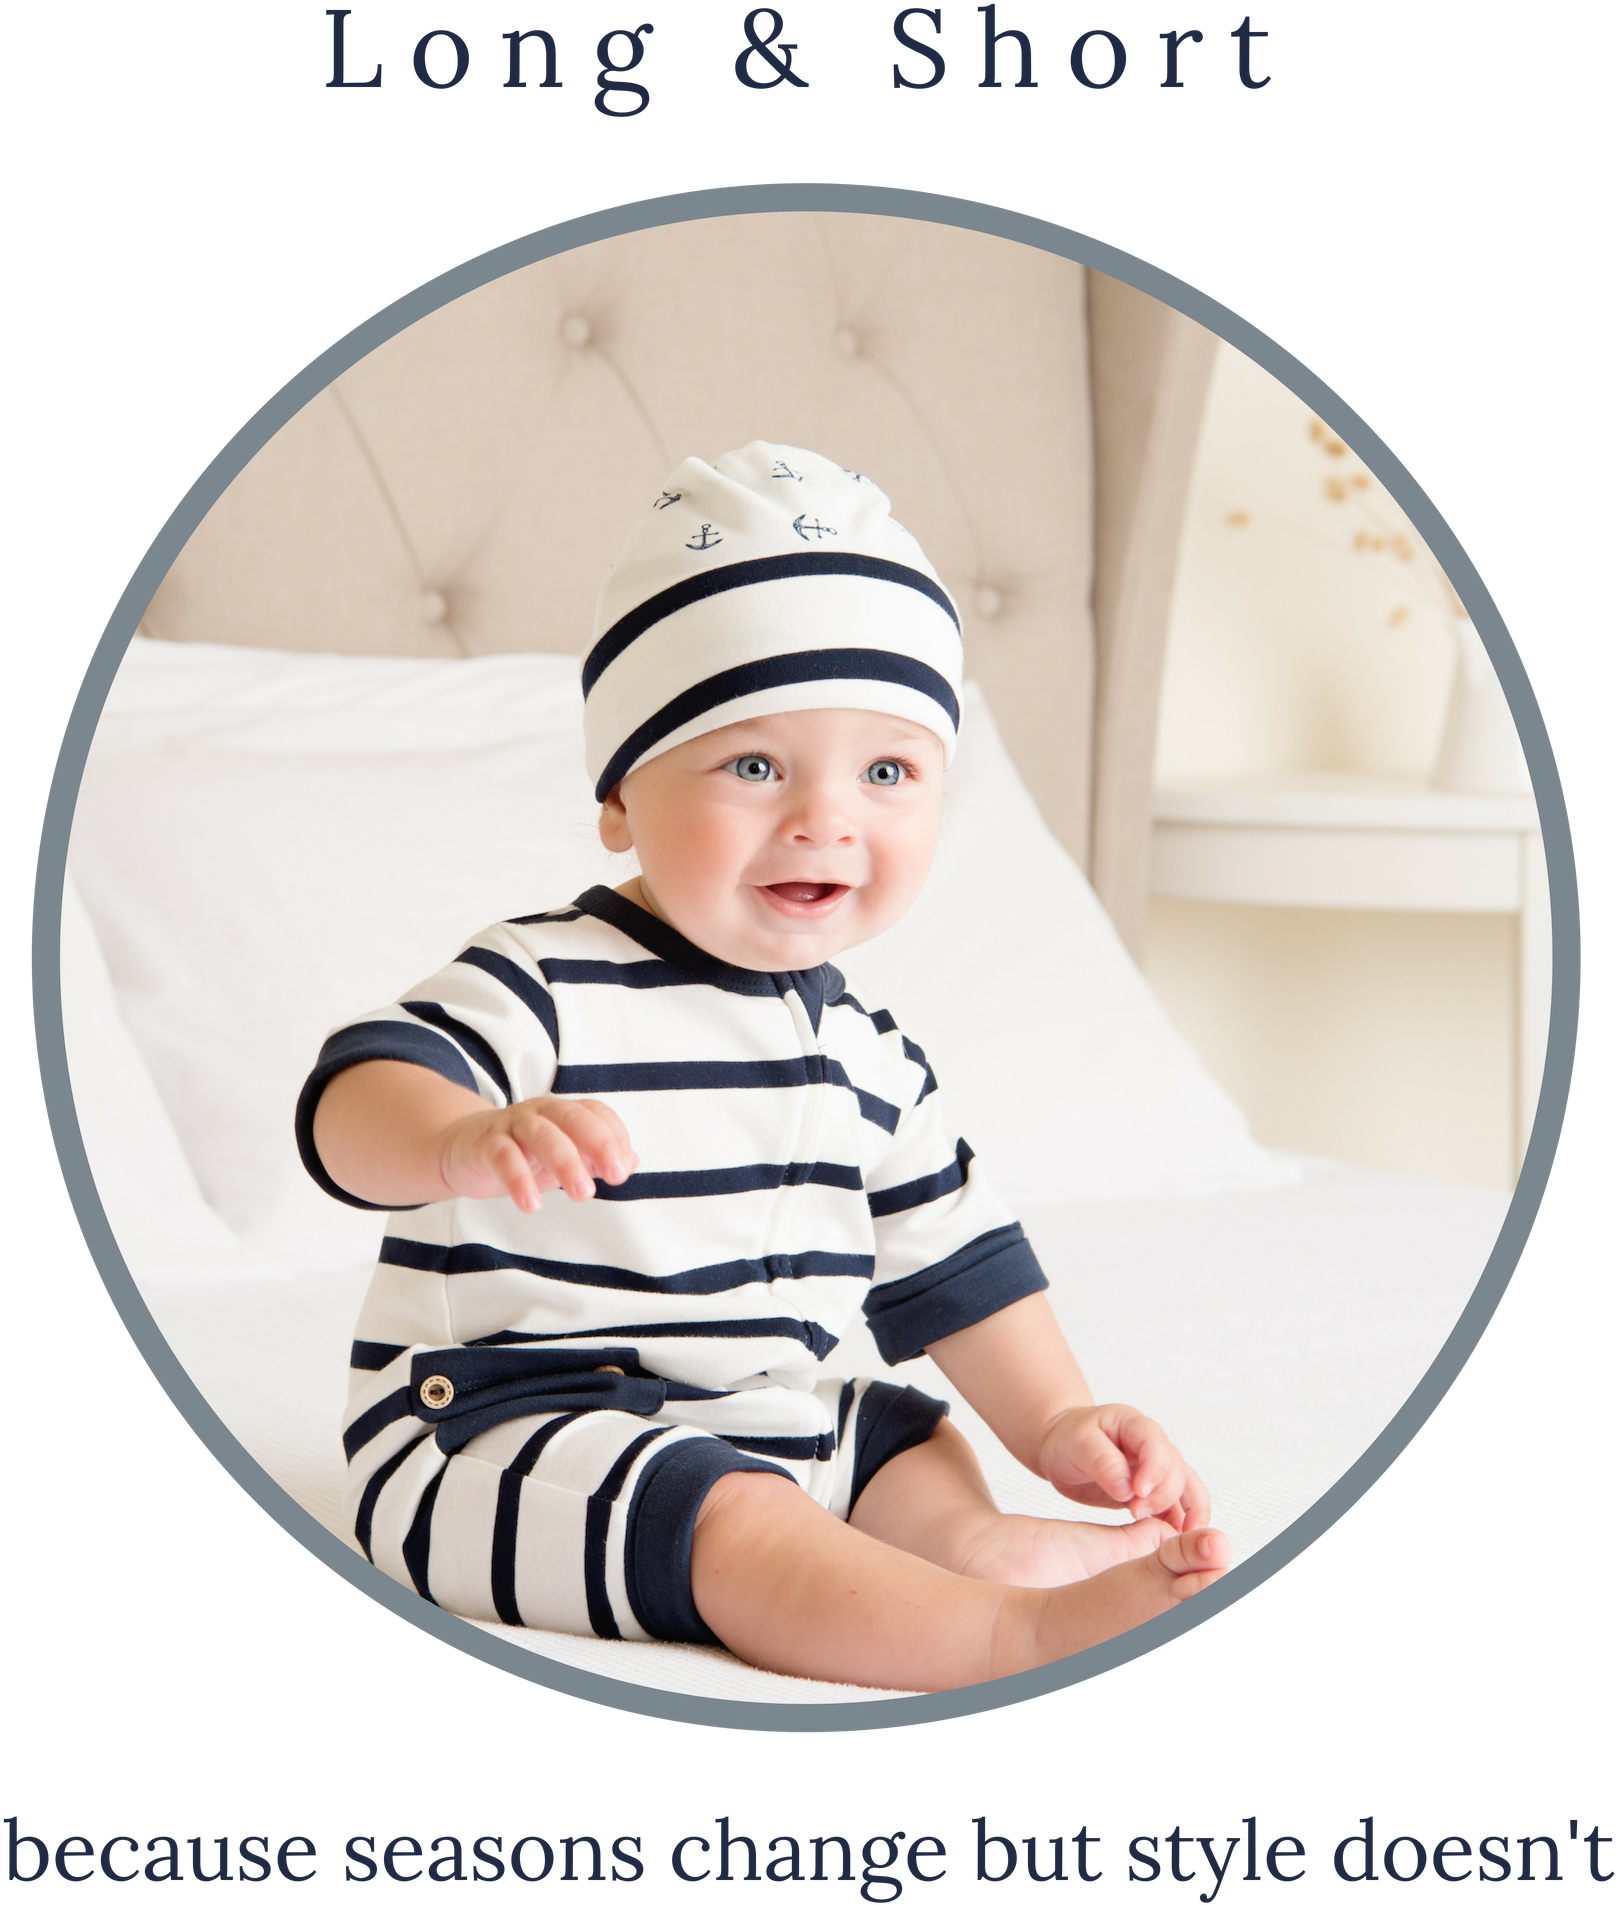 A Baby Wearing A Striped Outfit And Hat